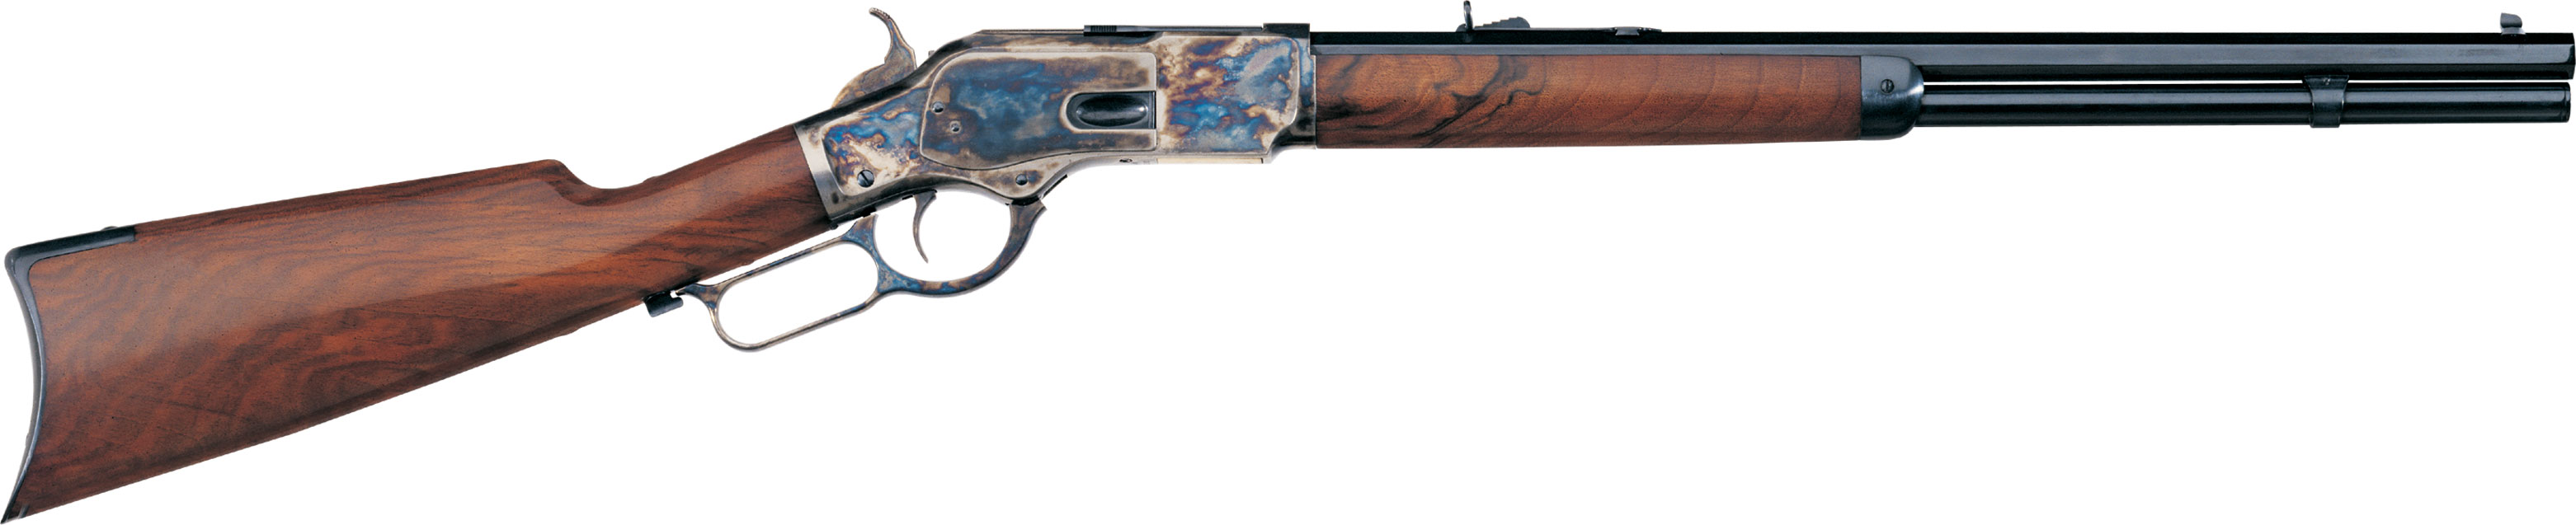 Winchester Rifle #16